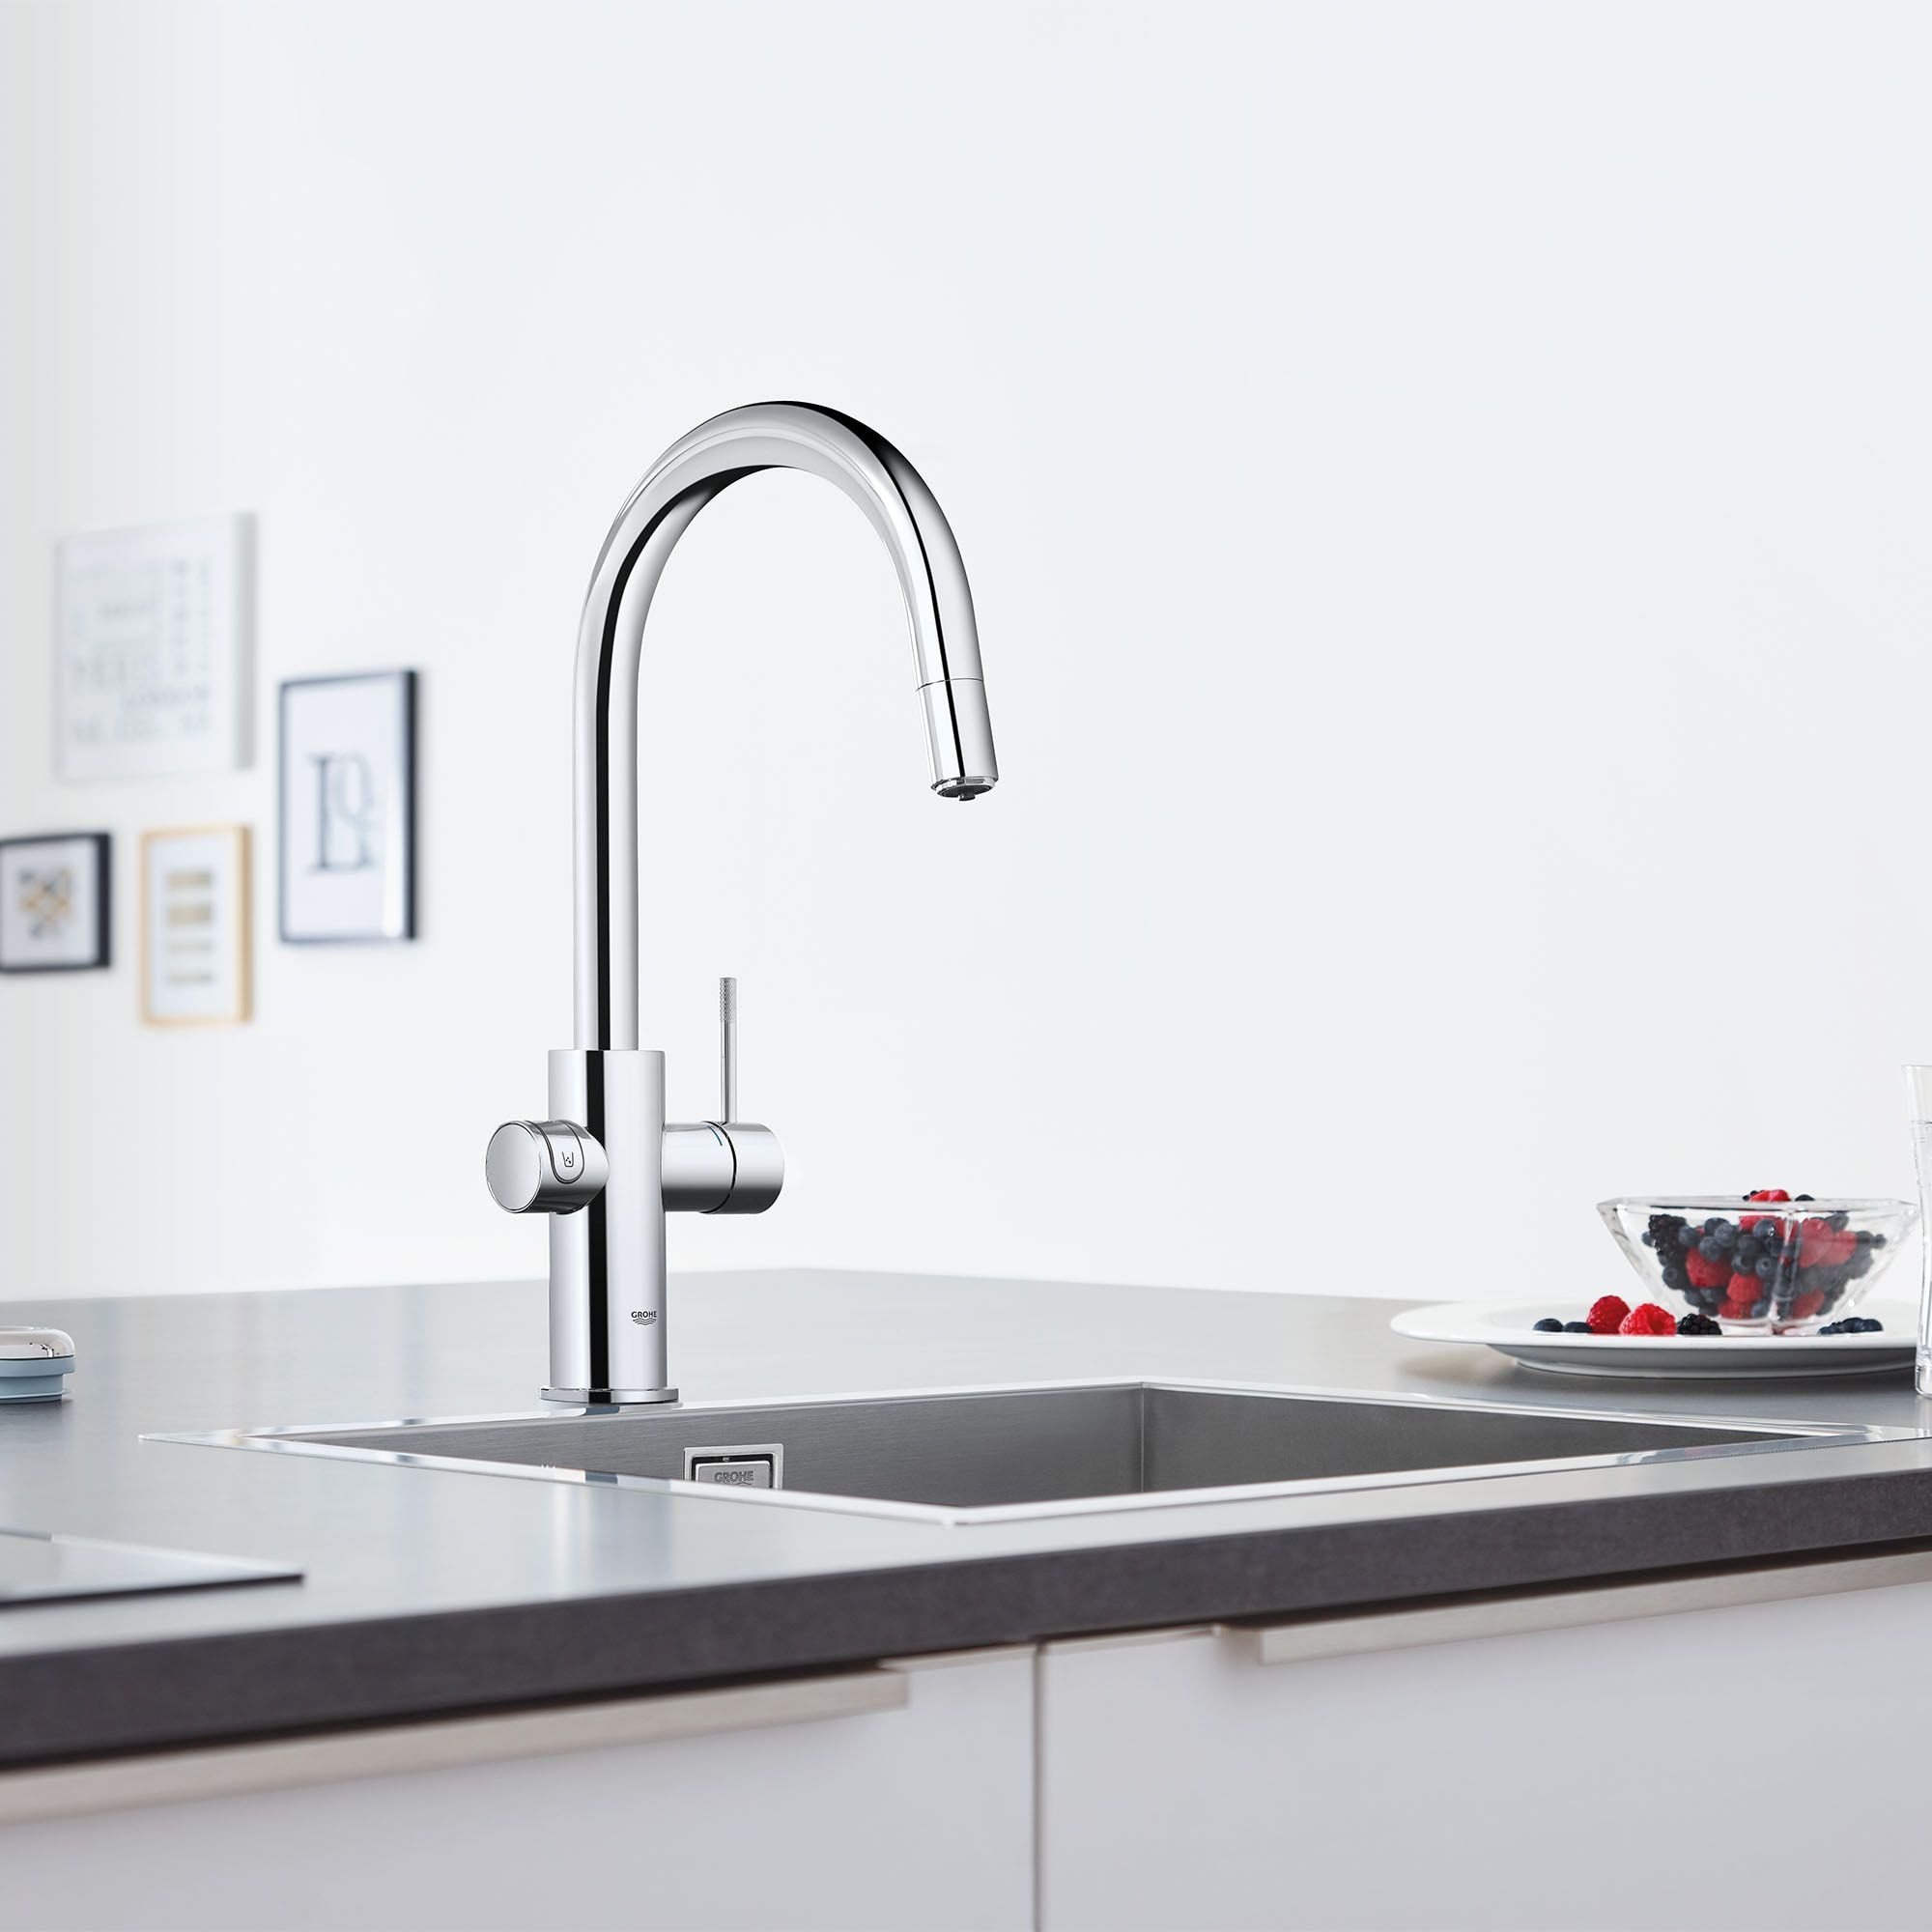 GROHE Chrome Single Handle High-arc Filtered Kitchen Faucet in Faucets department at Lowes.com